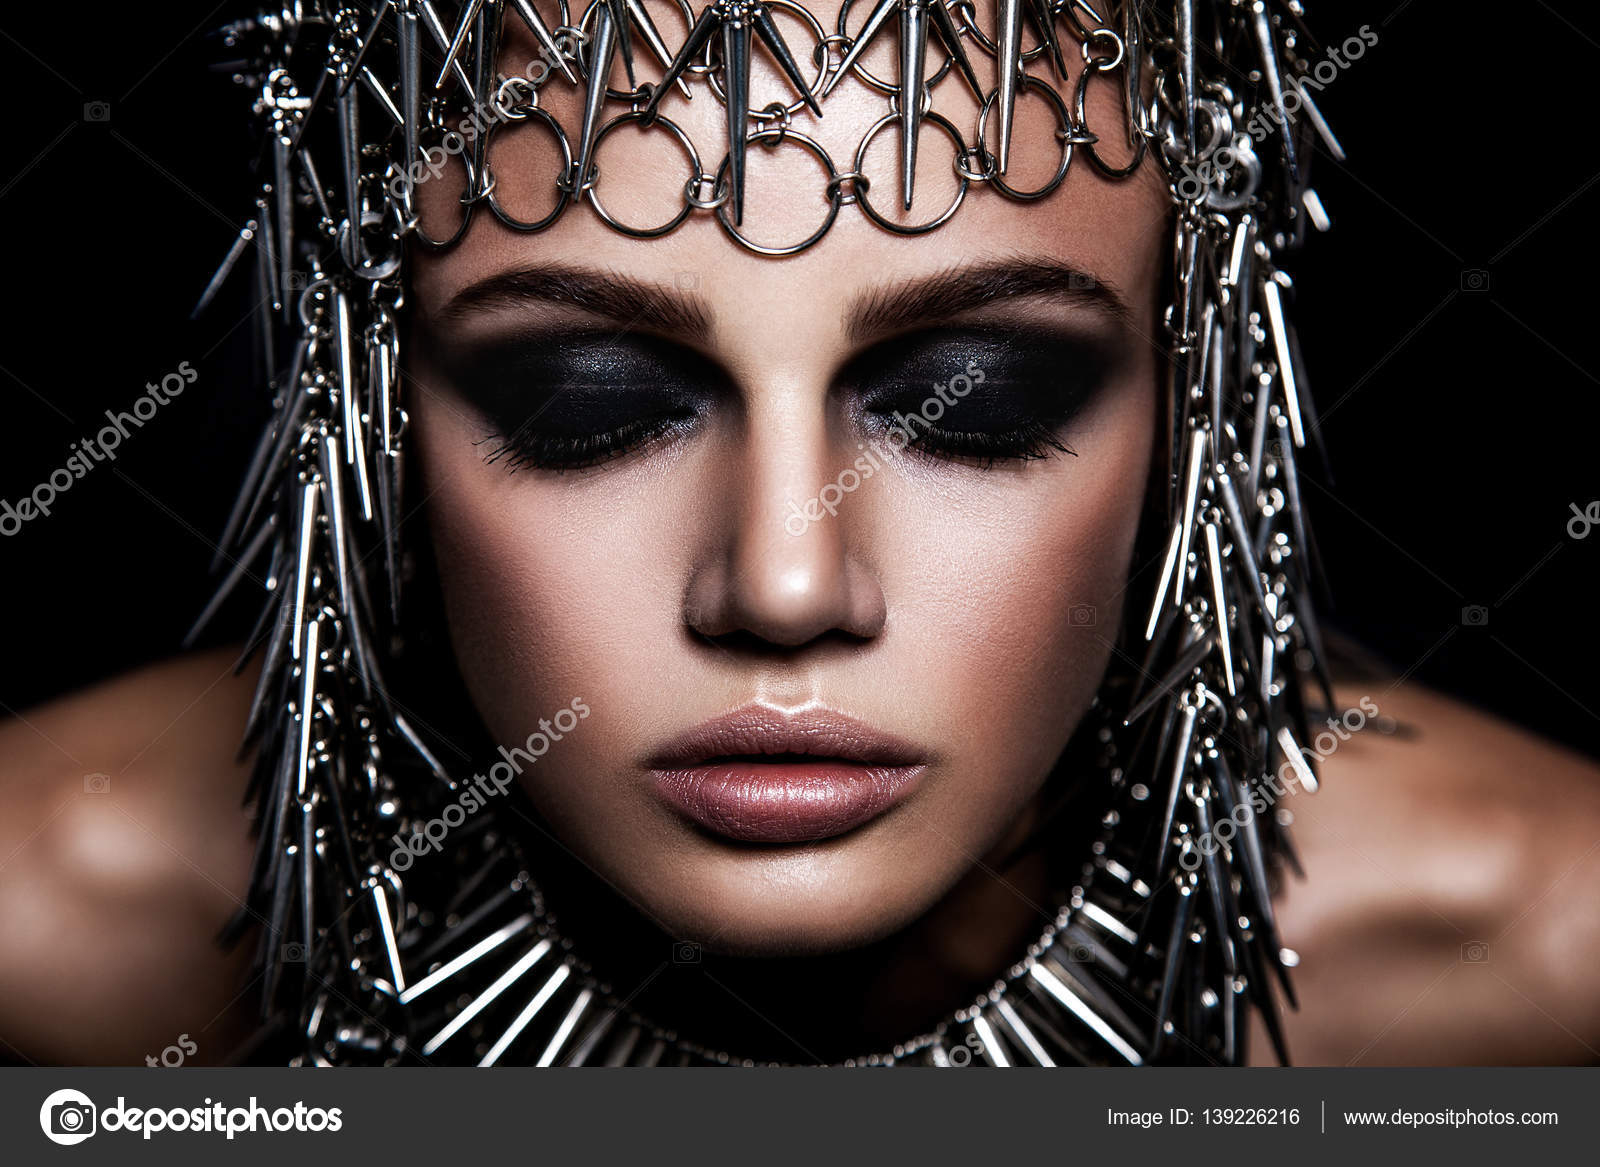 Blue Eyes Dark Makeup High Fashion Beauty Model With Metallic Headwear And Dark Makeup And